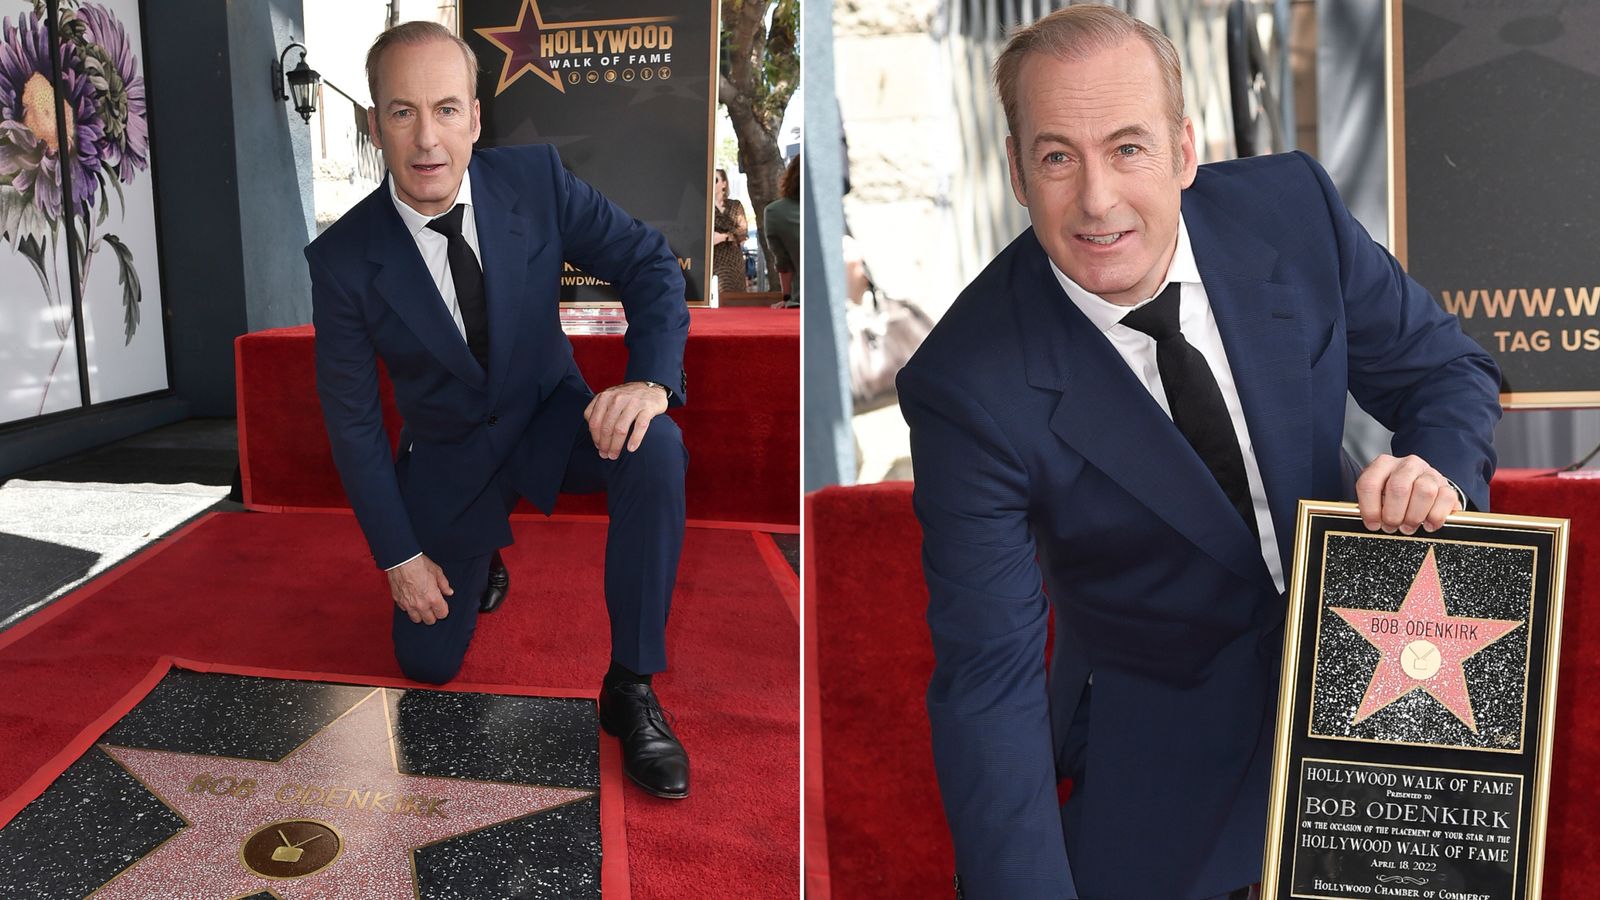 Better Call Saul star Bob Odenkirk jokes about hating Hollywood as he  receives Walk of Fame star | Ents & Arts News | Sky News